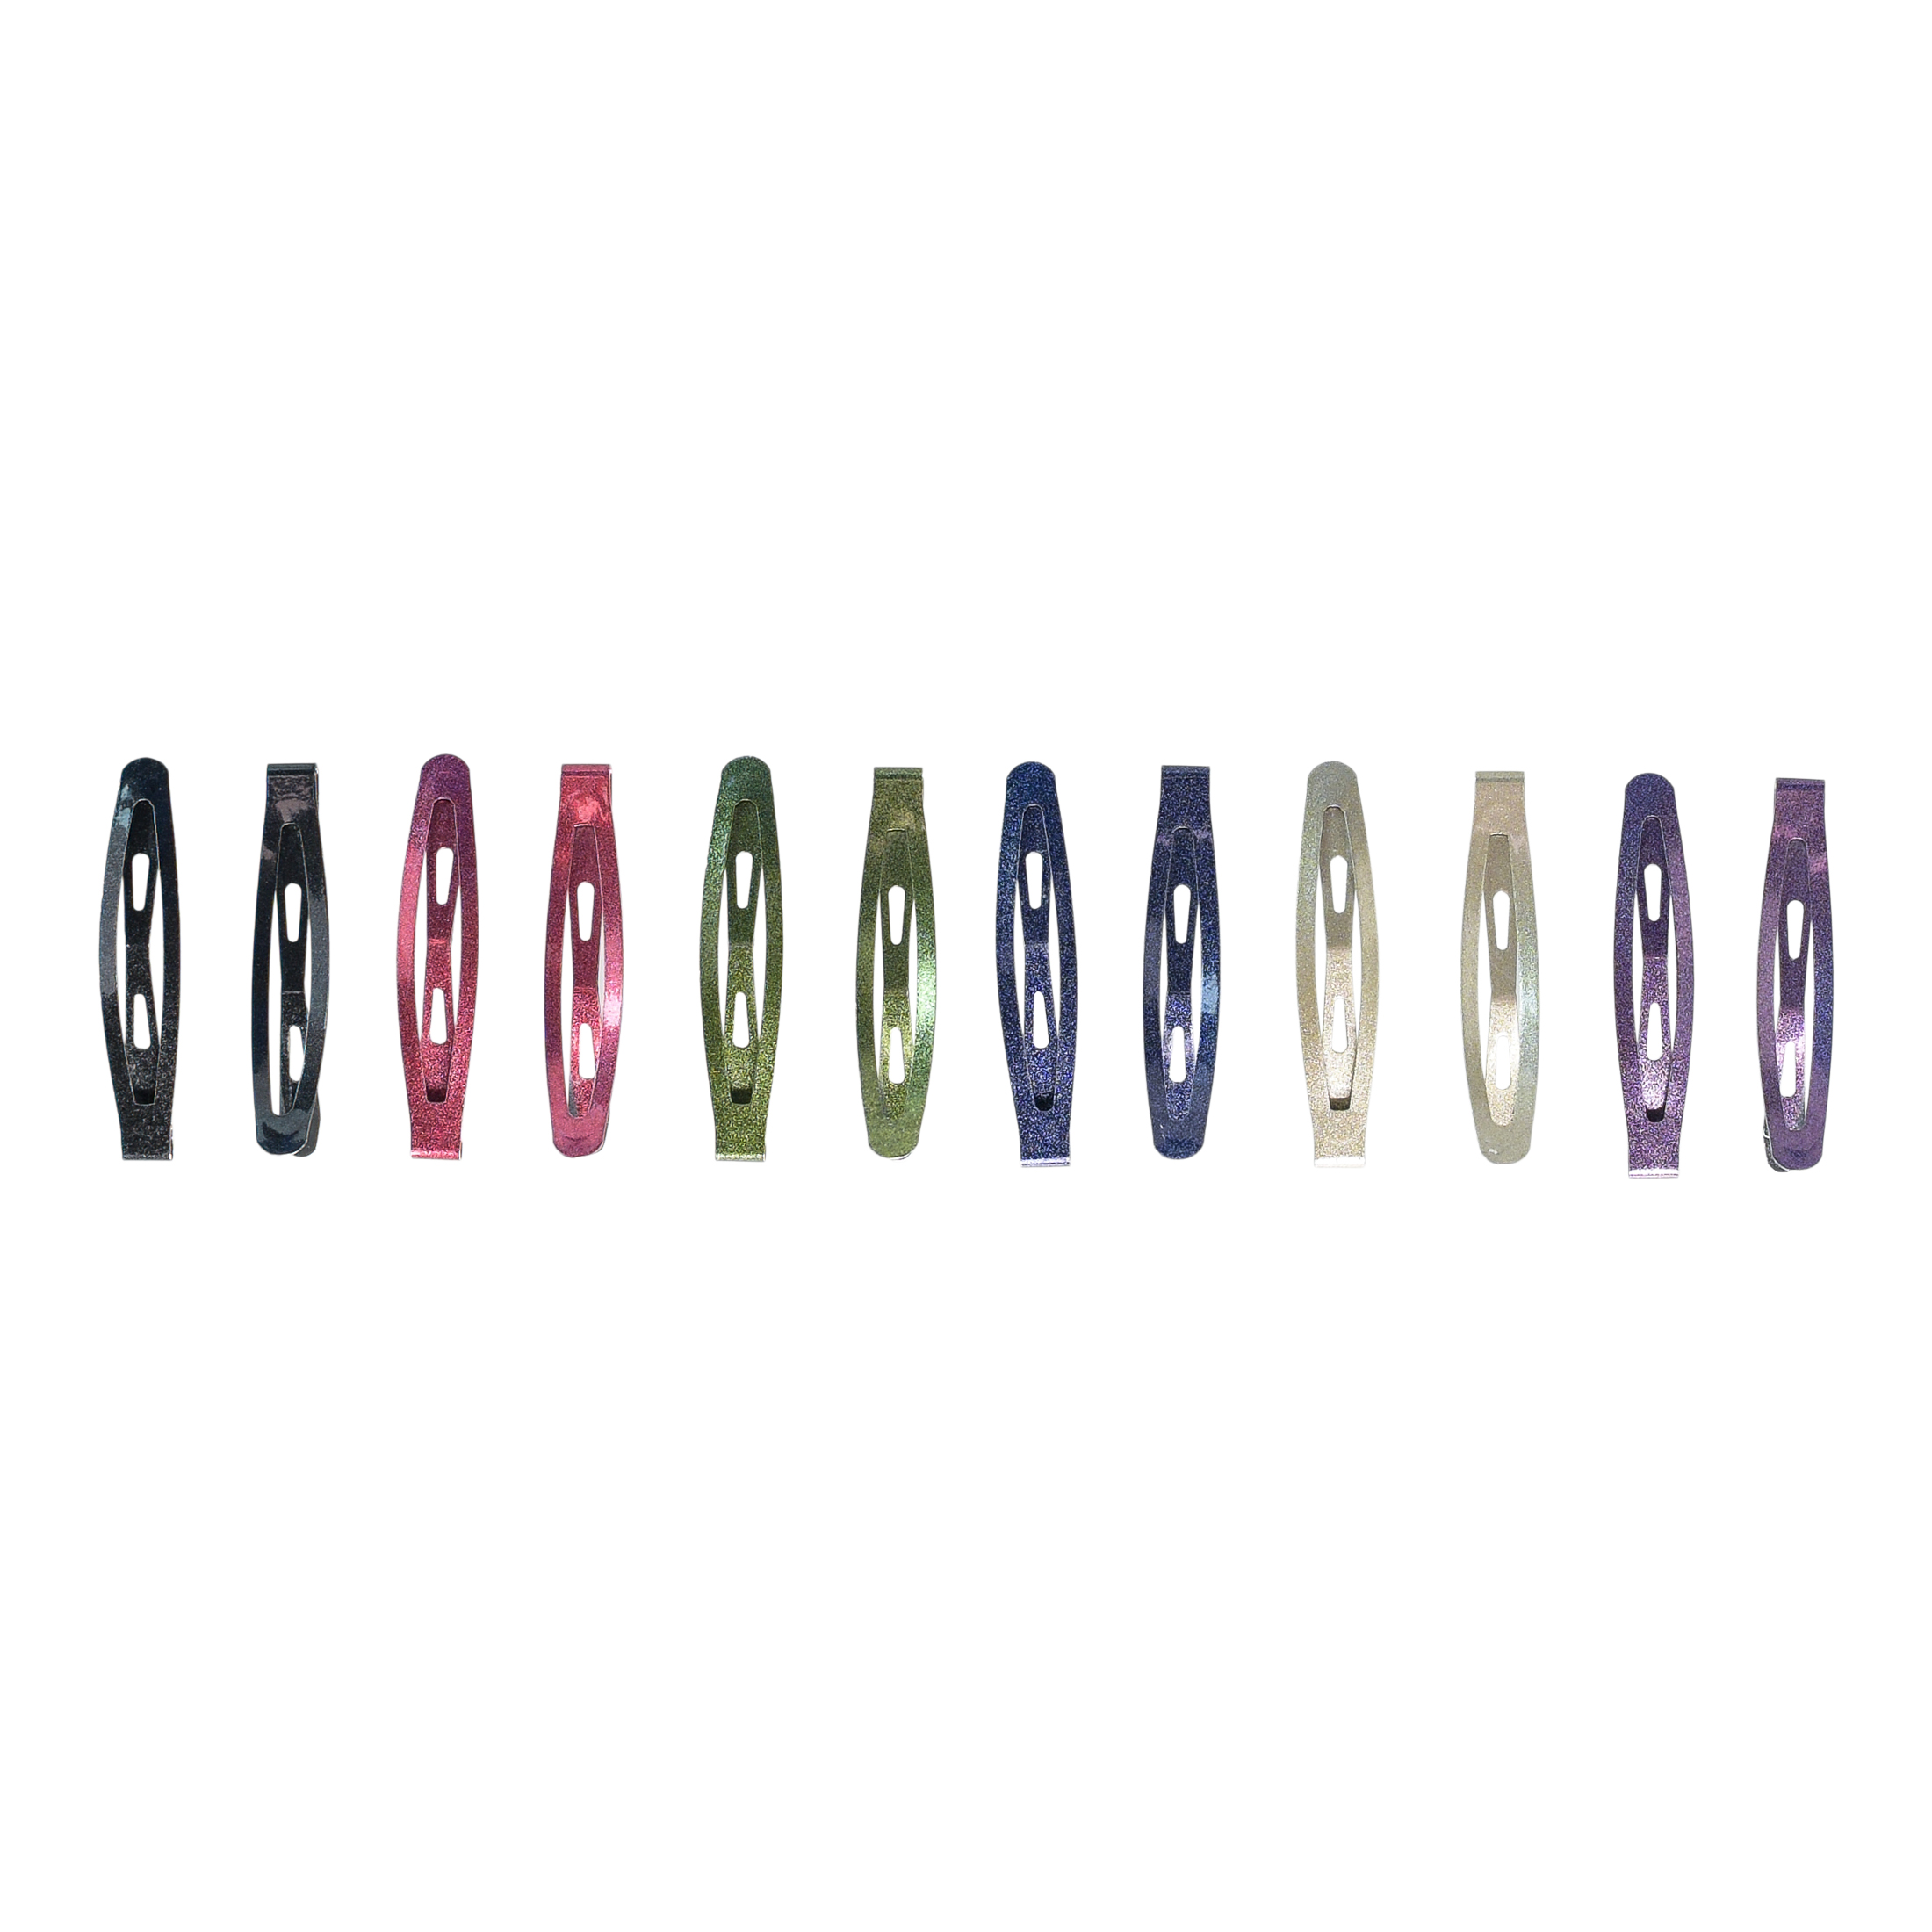 Scunci Metal Open-Center Snap Clip Barrettes, All Day Hold, in Multi-Color Jewel Tones, 12ct - image 5 of 8